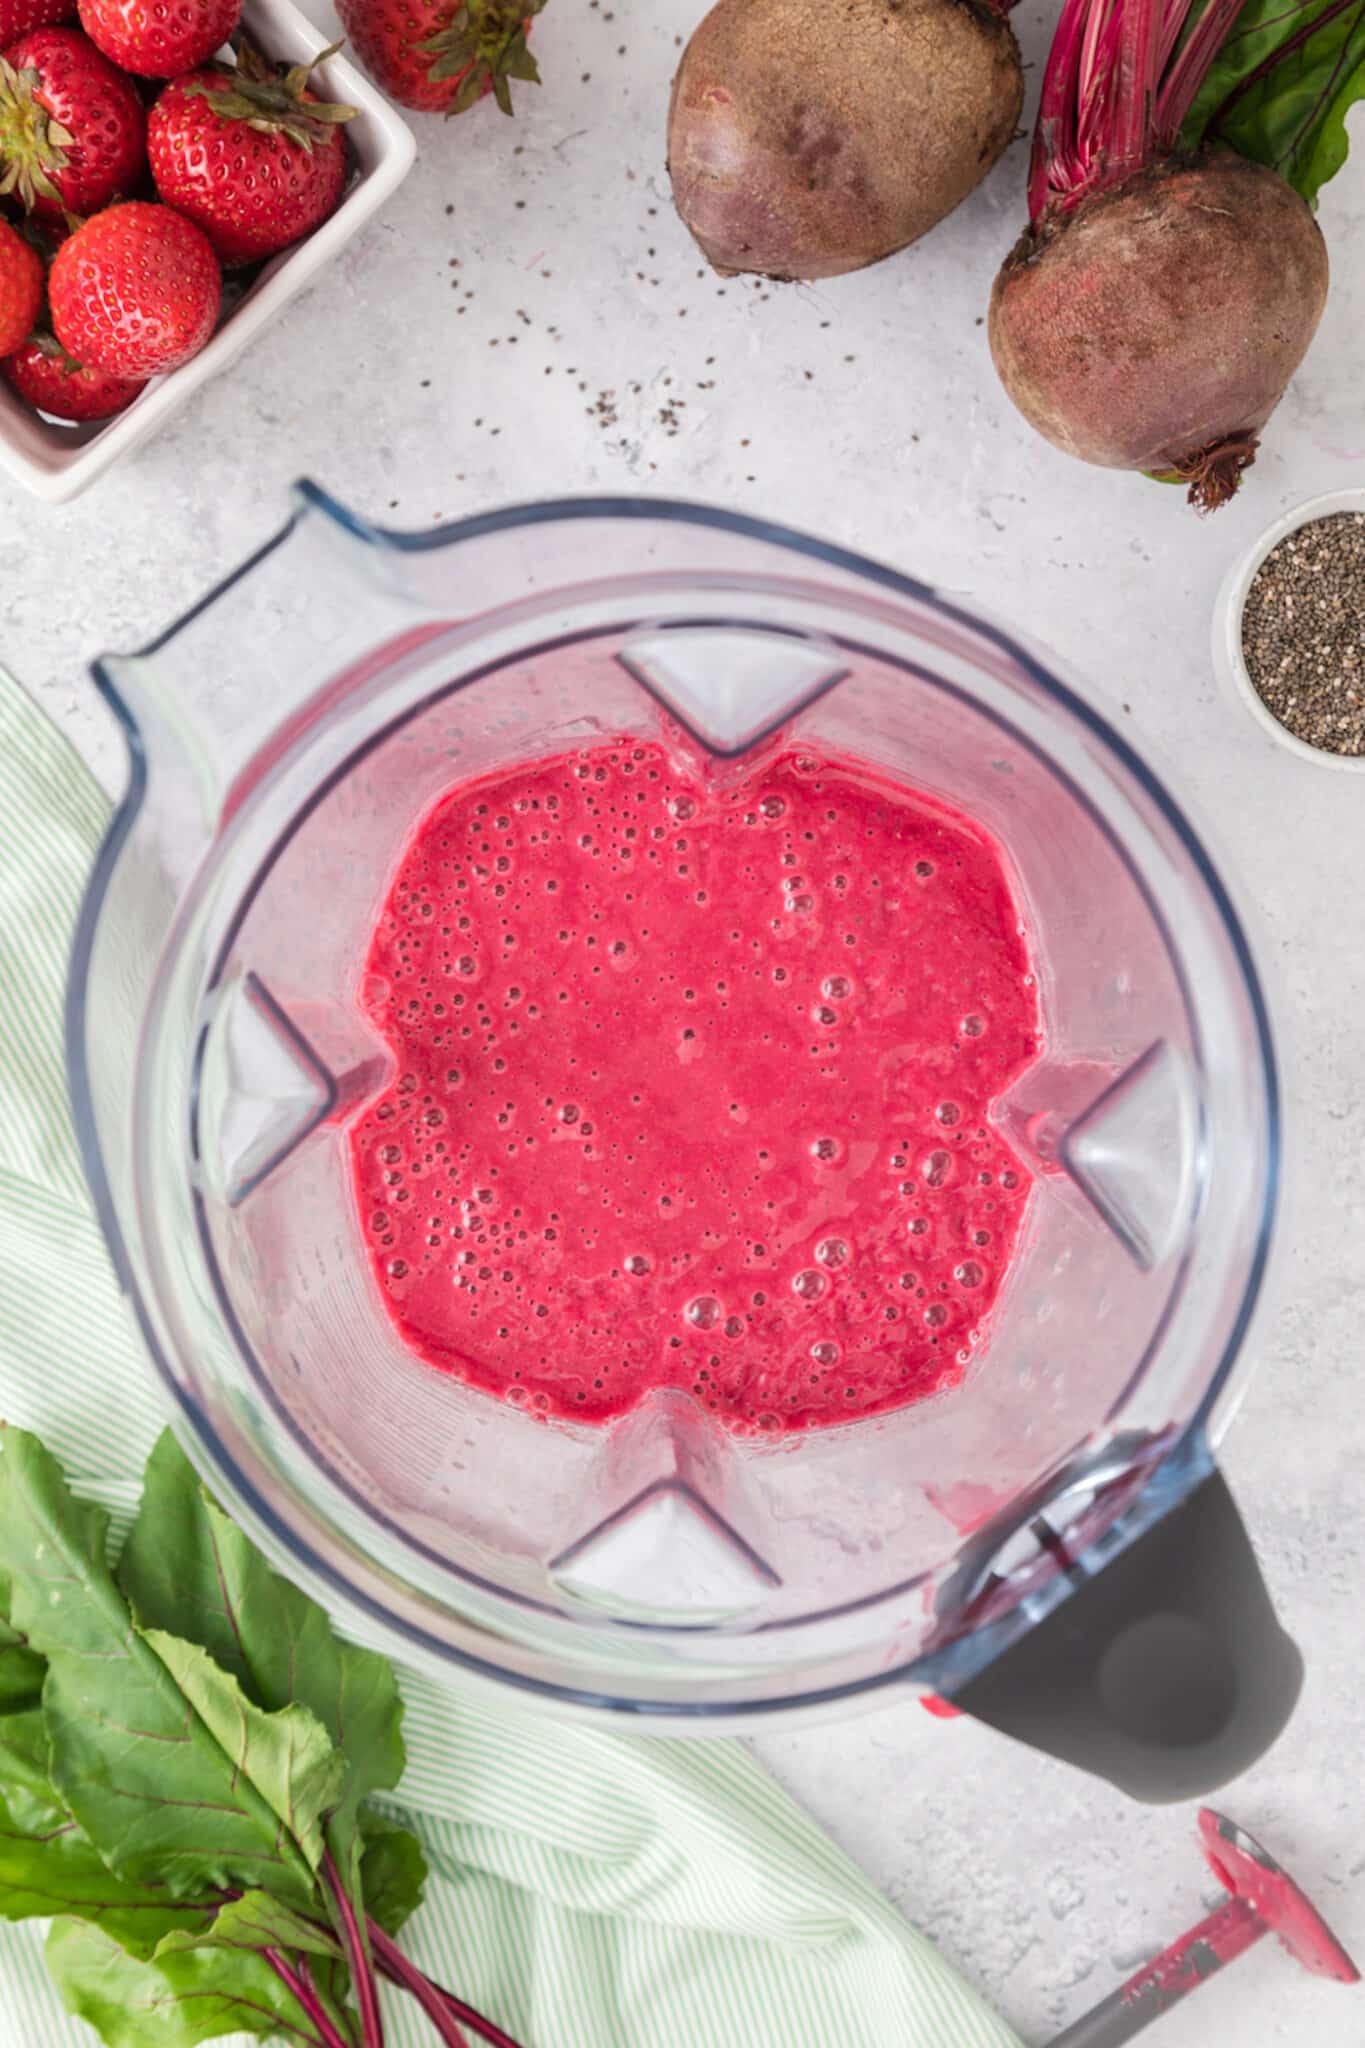 Top view of a strawberry smoothie in the jar of a blender.